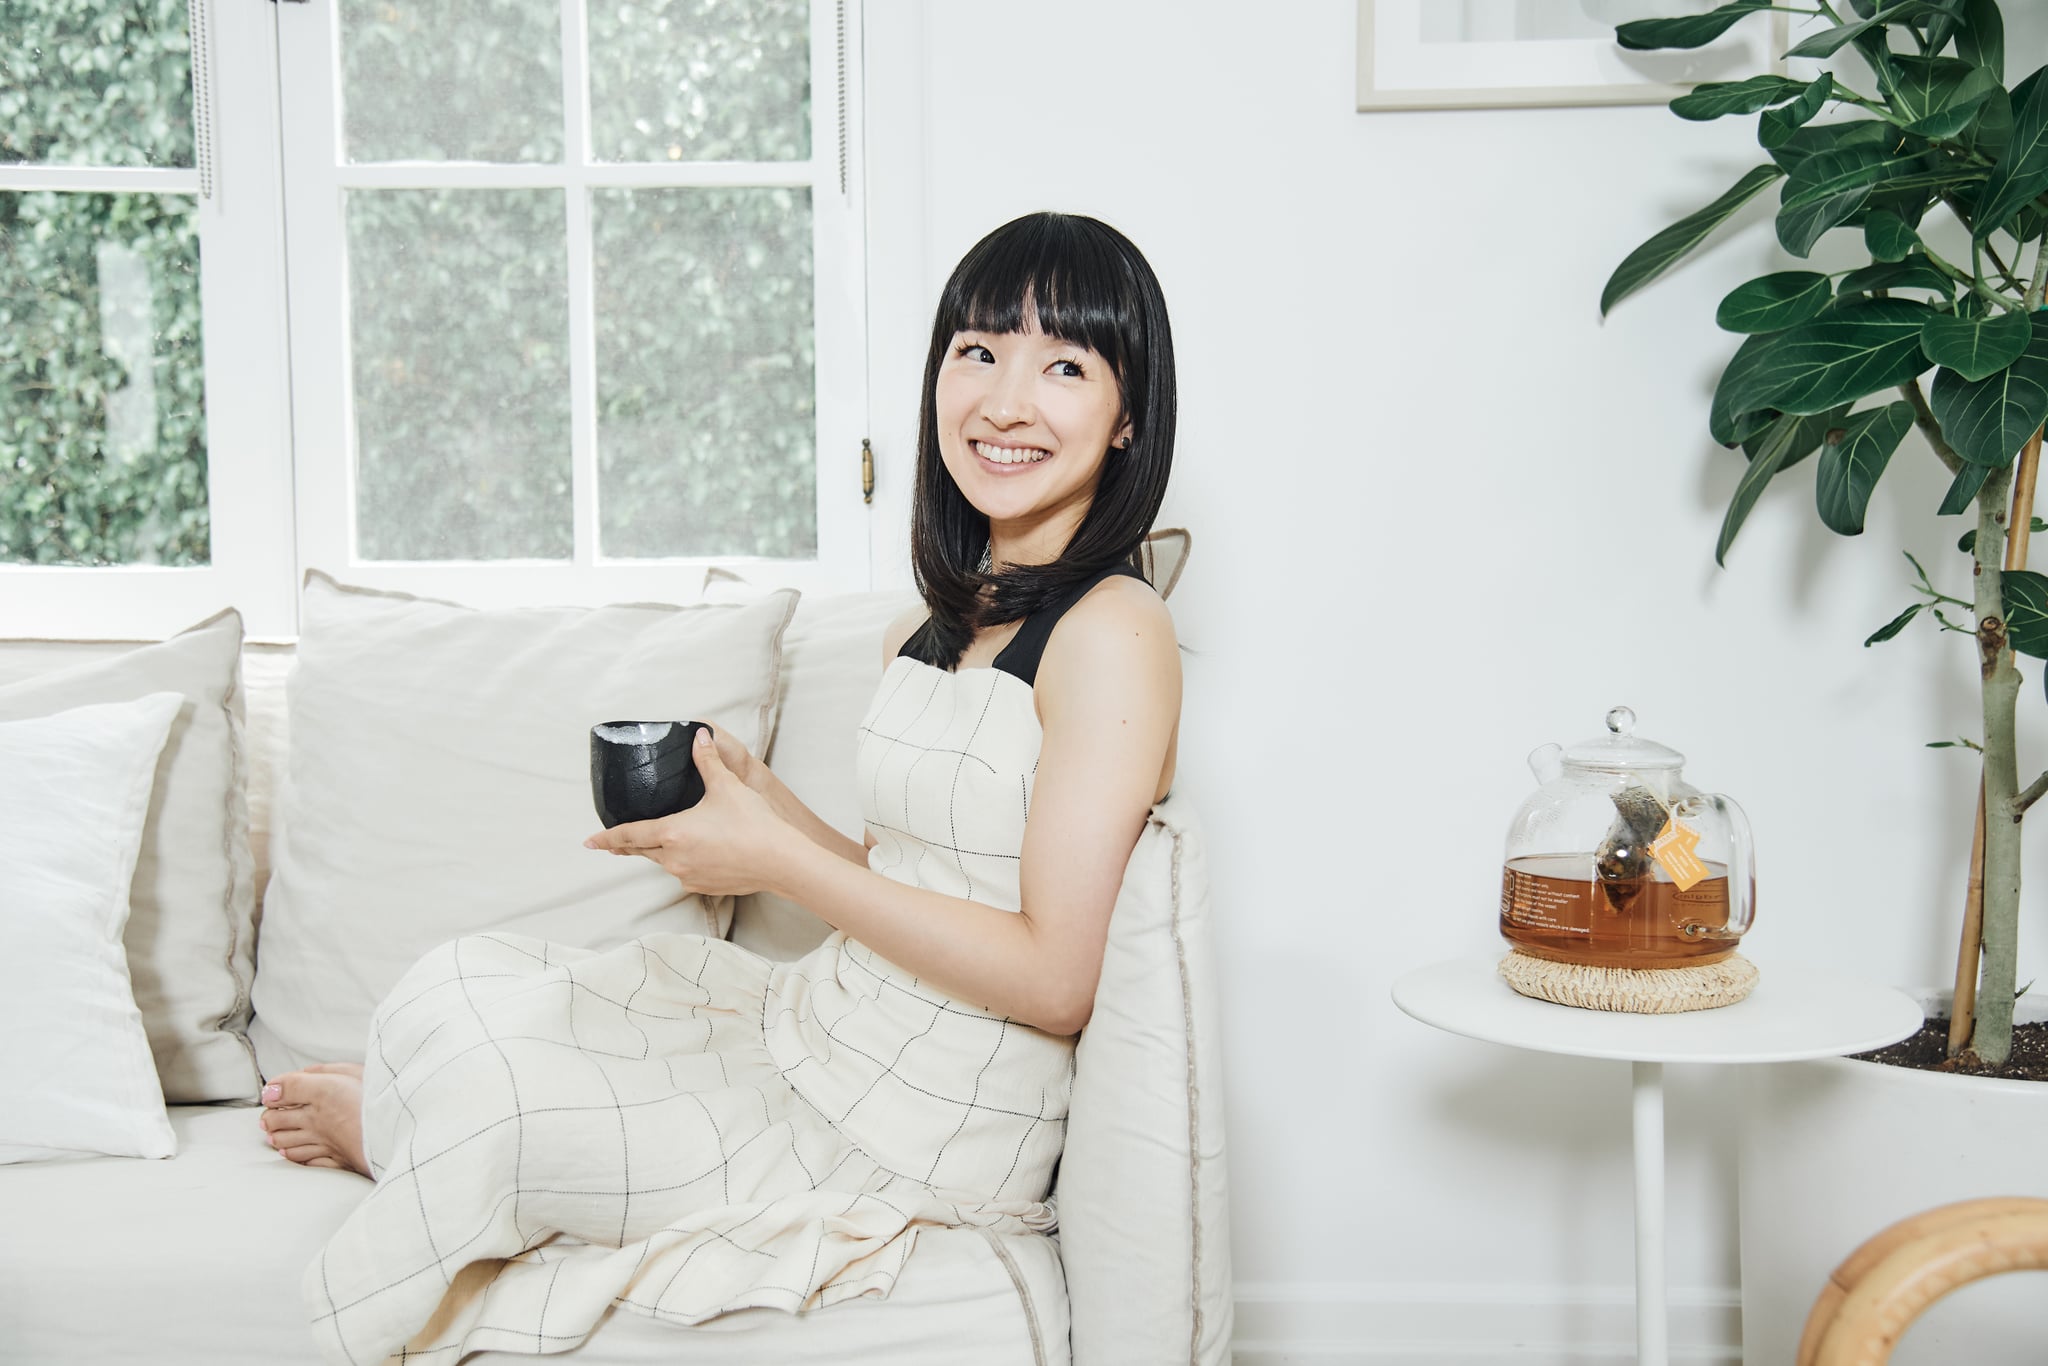 Organizing consultant and television personality Marie Kondo, Konmari, poses for a portrait in her home office. (Photo by Michael Buckner/Variety/Penske Media via Getty Images)